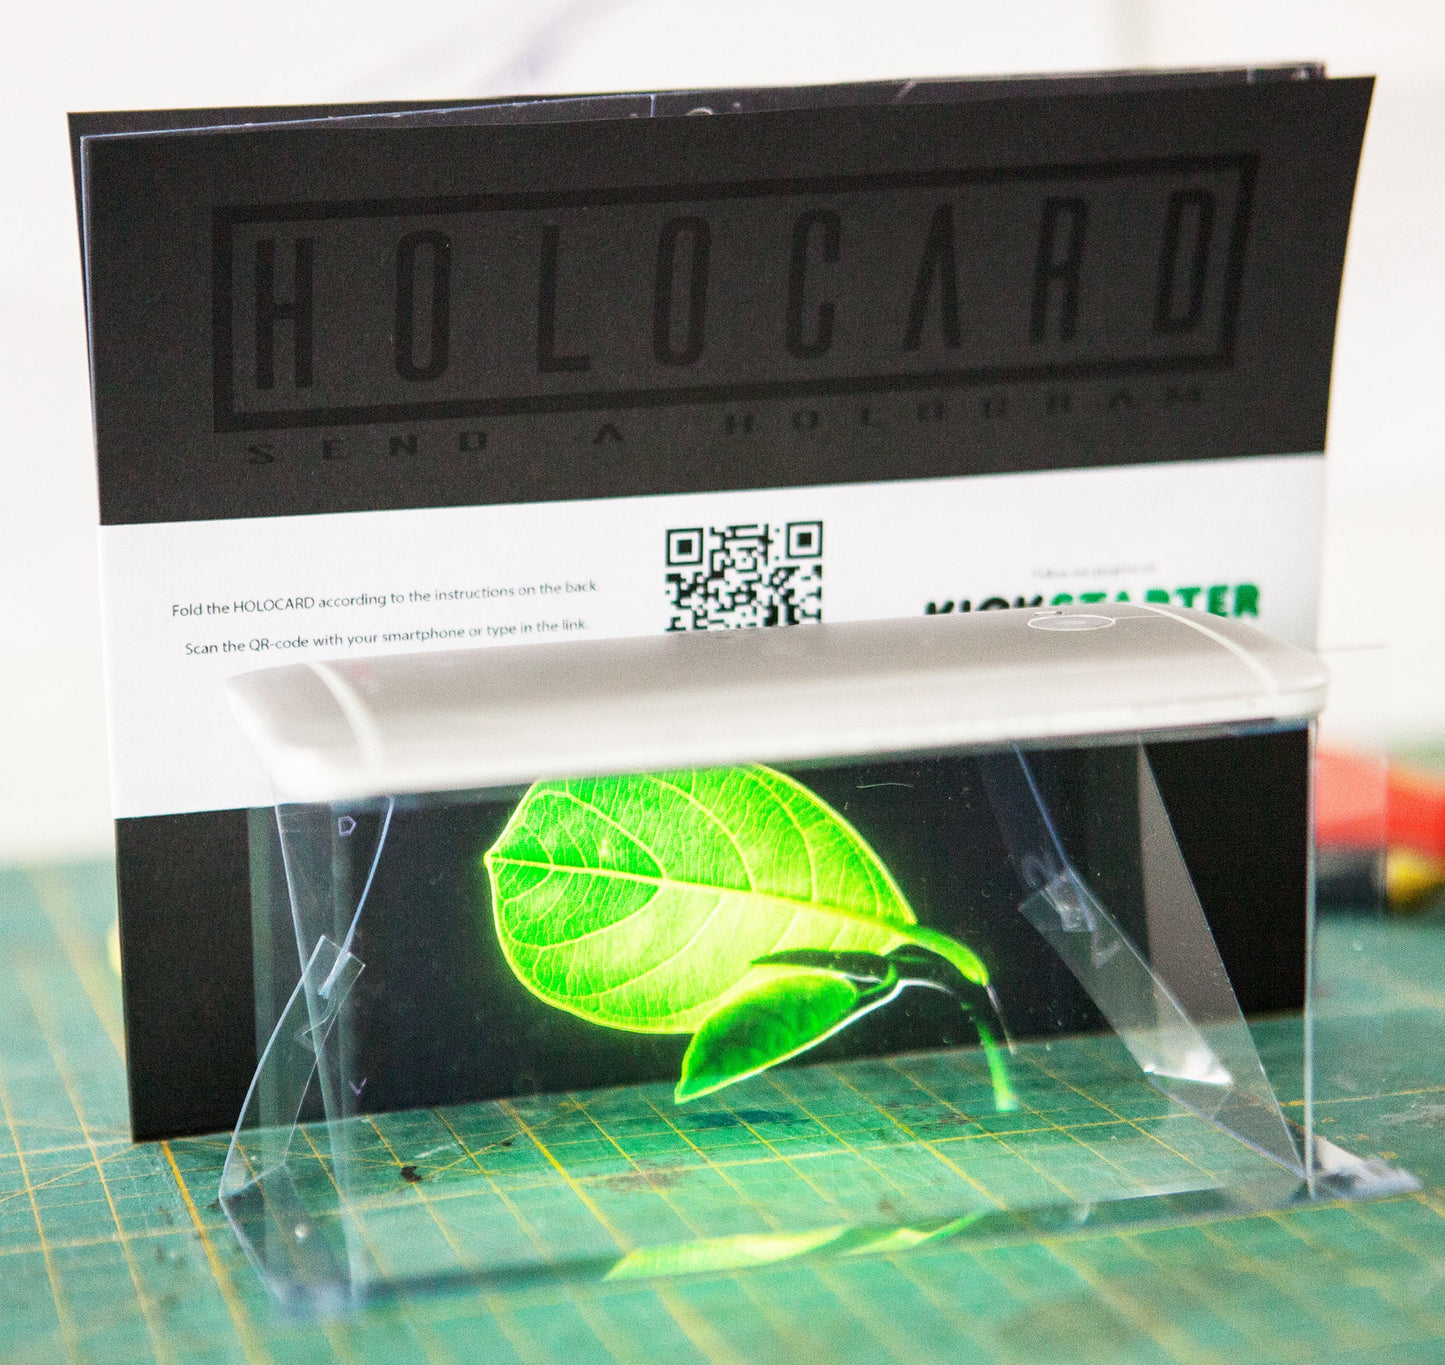 HOLOCARD 3-pack | Hologram display for smartphones | Use this new tech gadget to see holograms with your smartphone